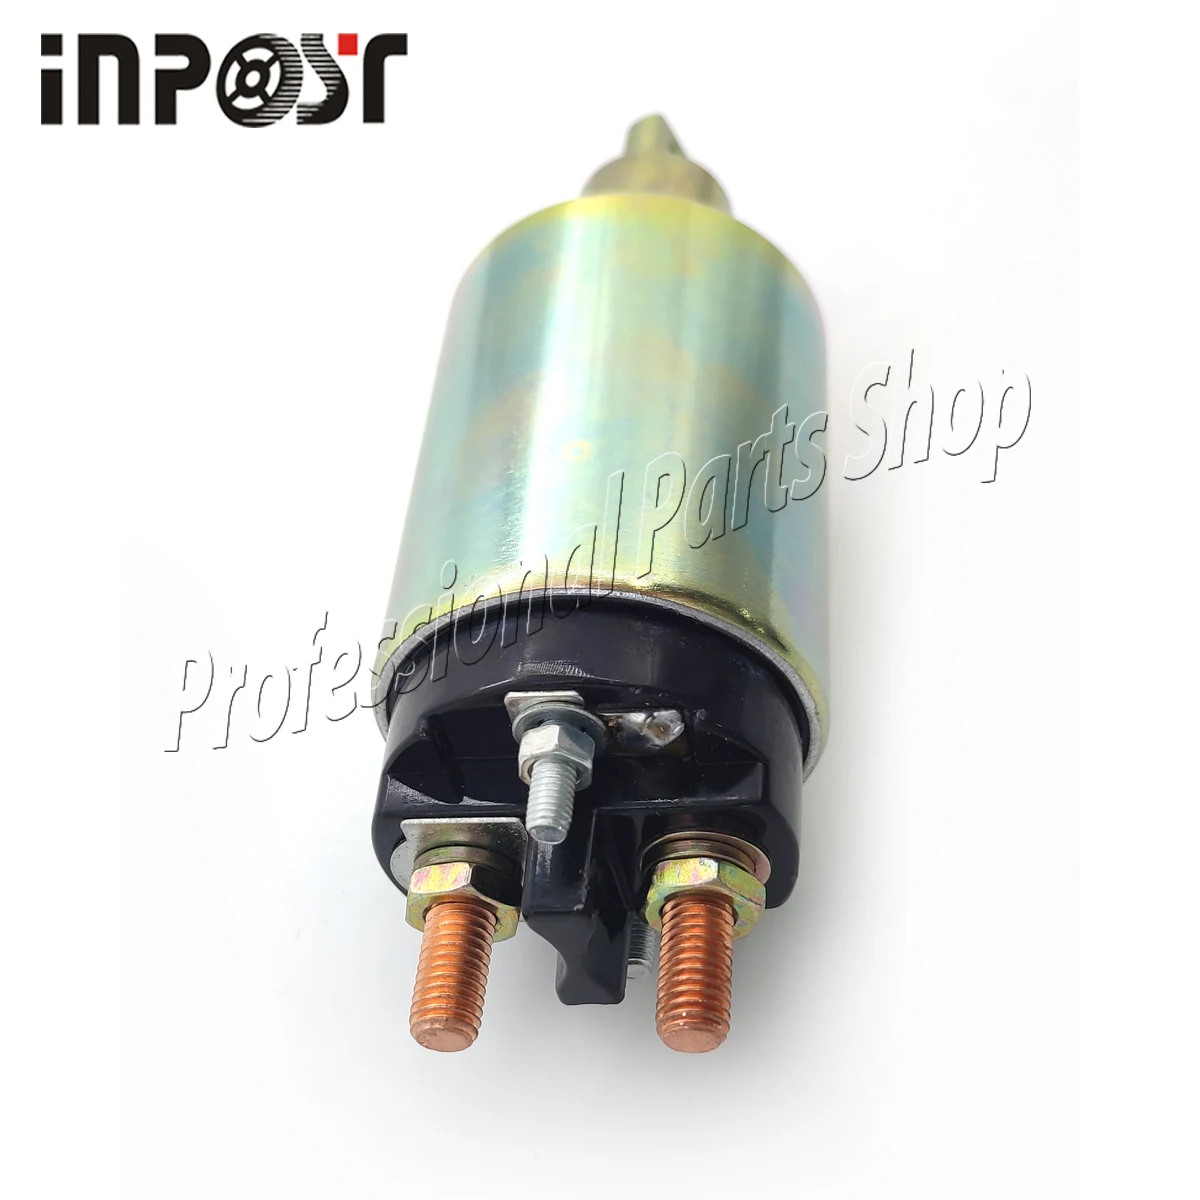 

Starter Solenoid 6680376 for Bobcat 751 753 763 773 863 864 873 883 T110 T140 A220 A300 A770 S100 S130